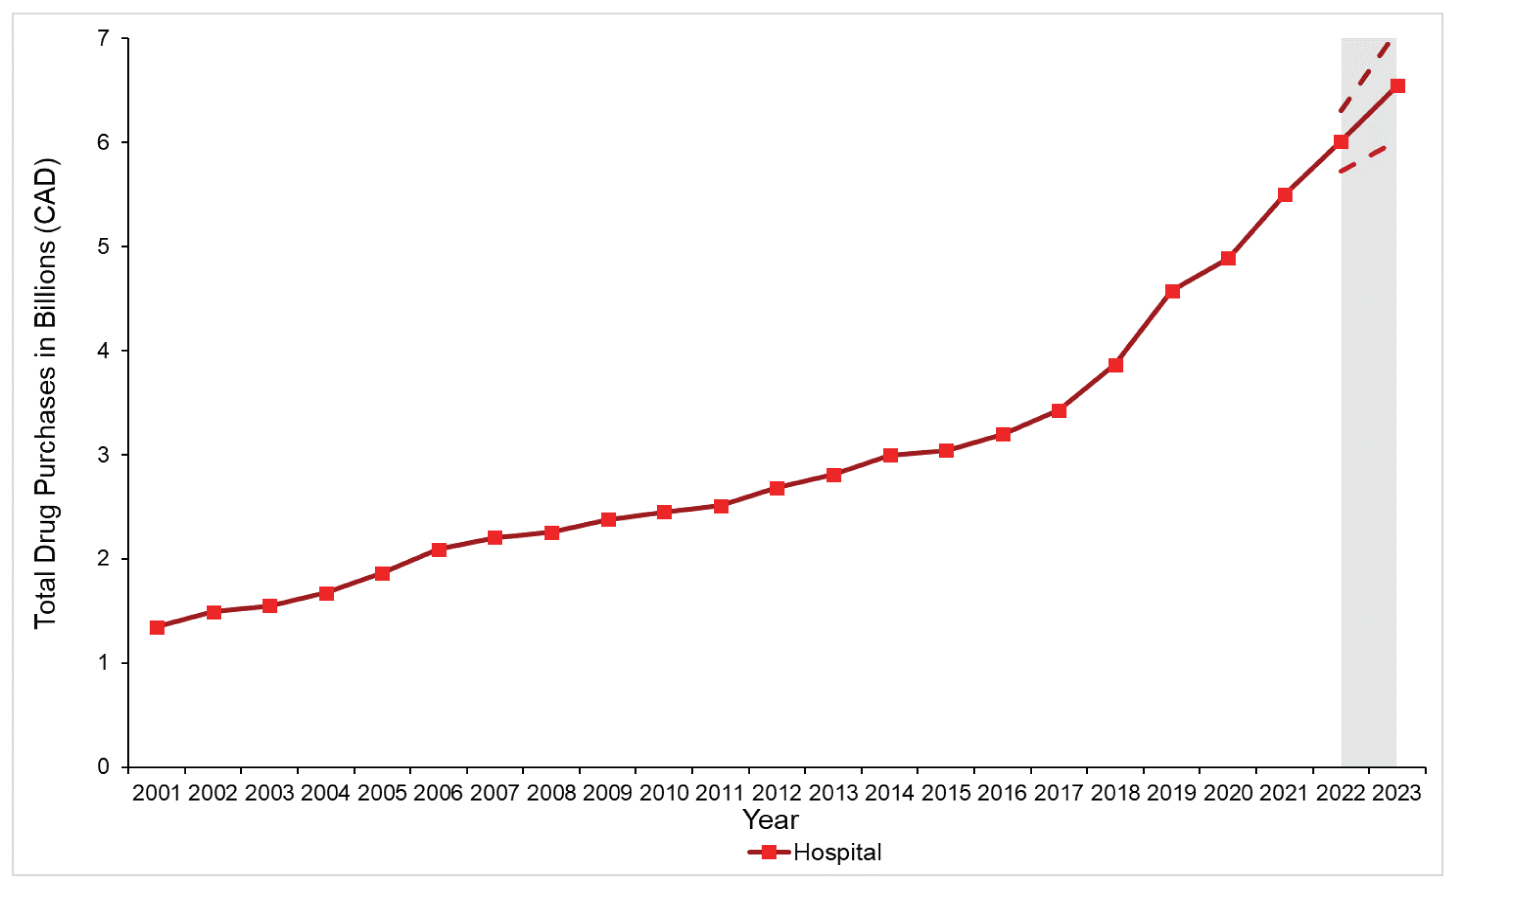 Alt text: Line graph of annual purchases across Canada for the hospital sector from 2001 to 2021 that highlights sustained growth over the last 21 year with a sharp increase in the last 5 years. This figure also highlights the projected continued growth over the next 2 years.